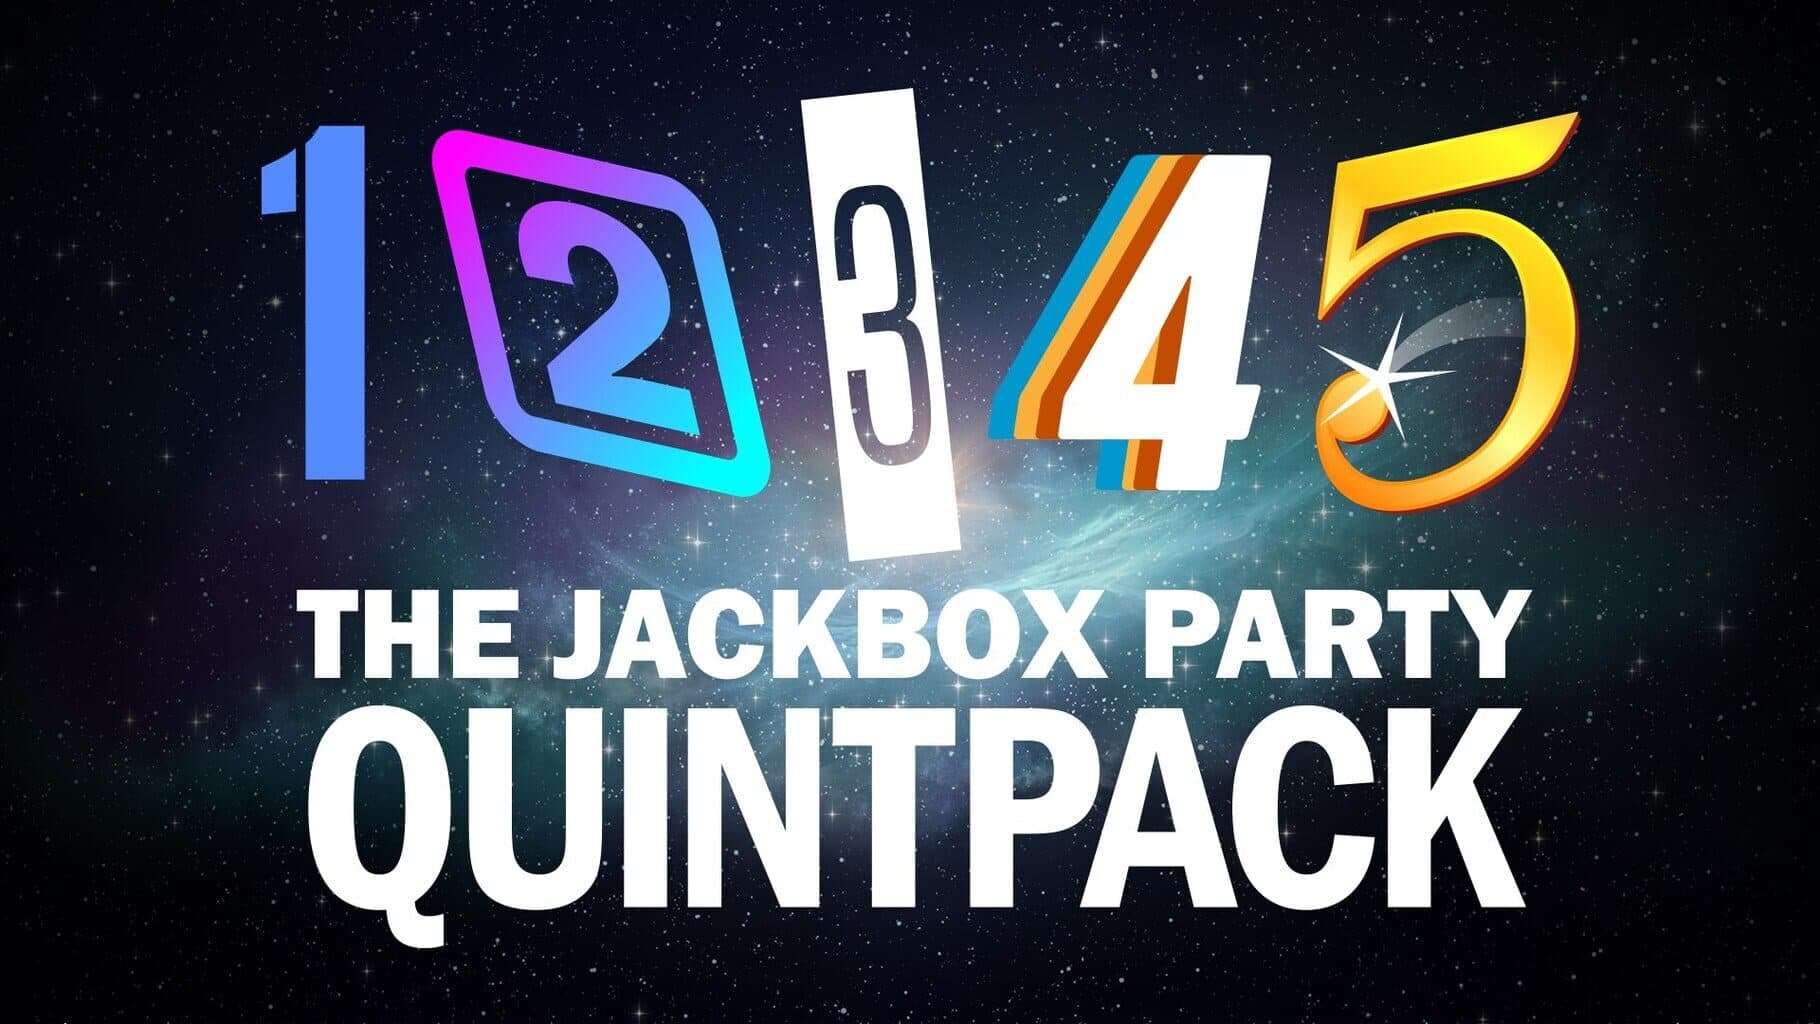 The Jackbox Party Quintpack Image